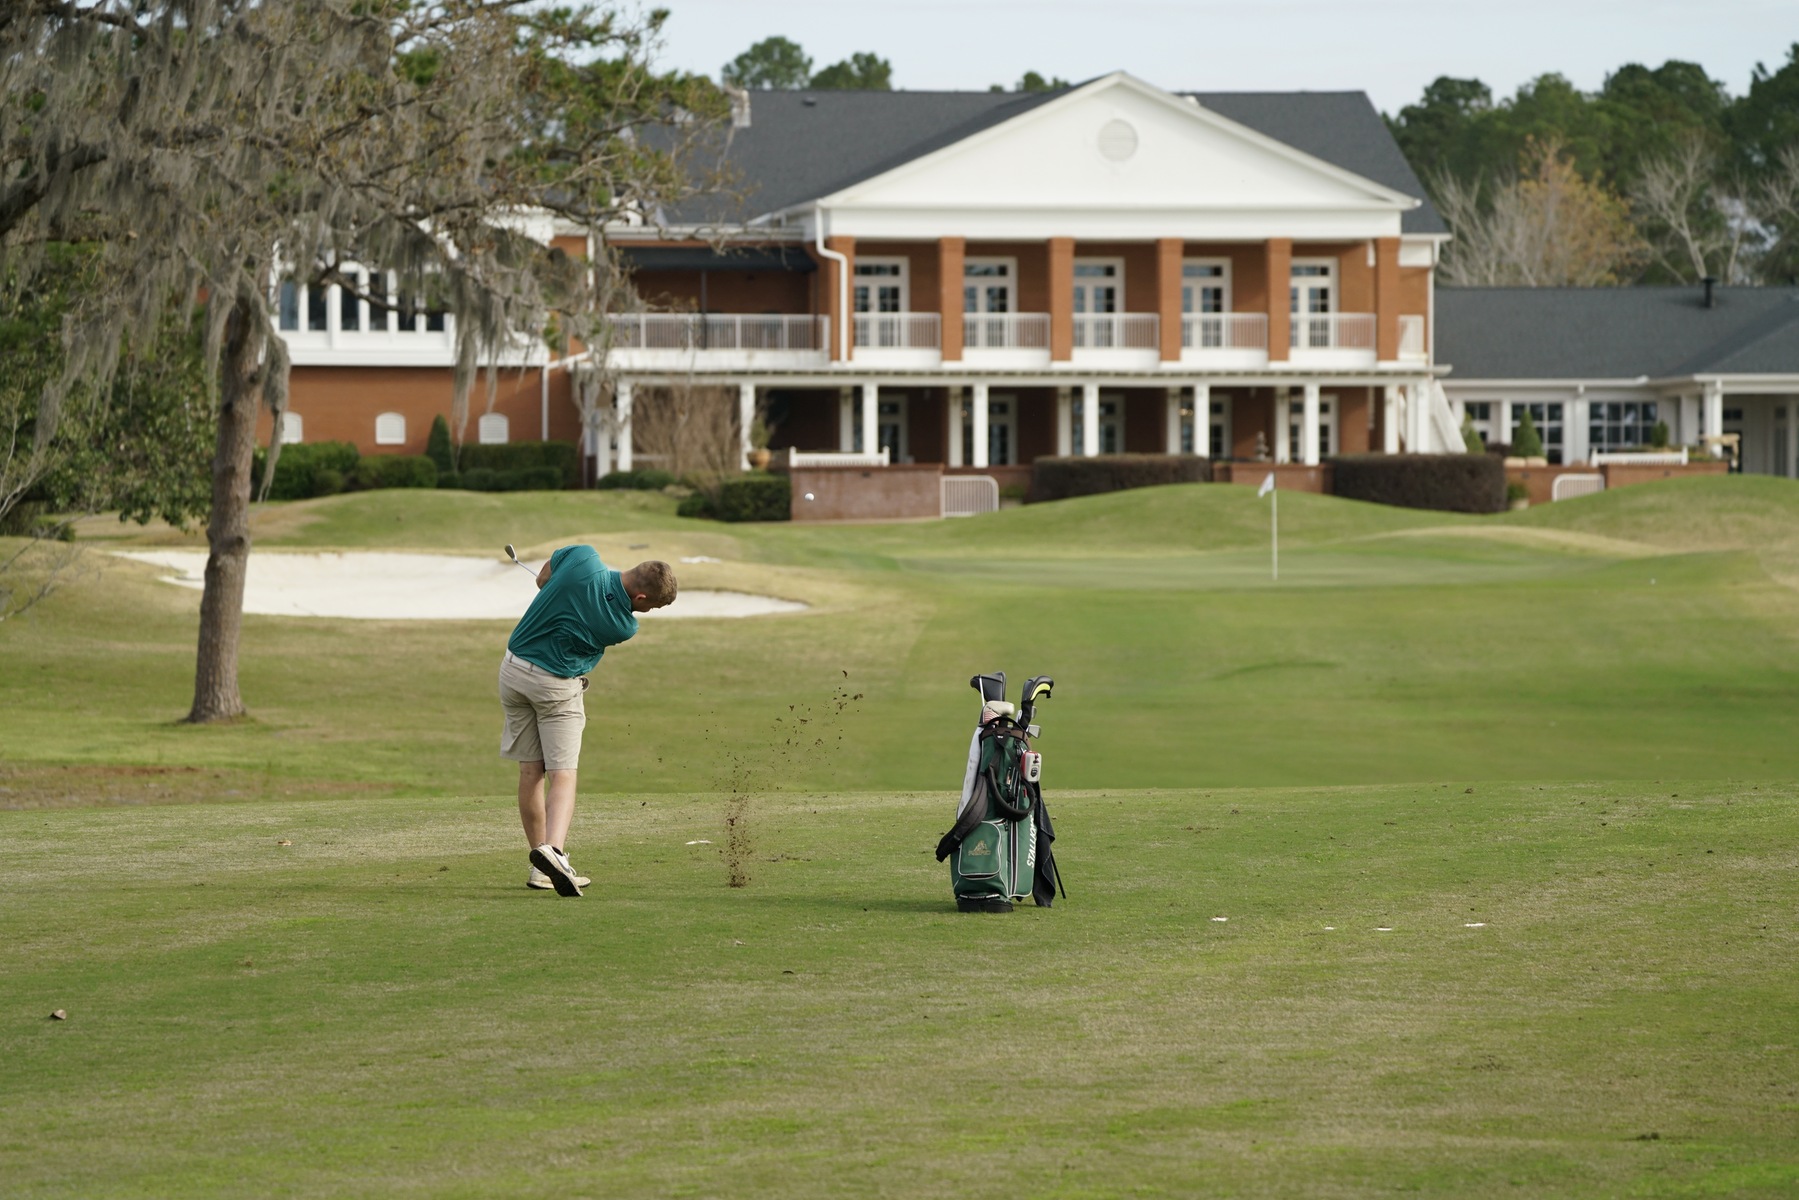 Golfer hitting the ball behind the club house at Forest Lakes Golf Club.